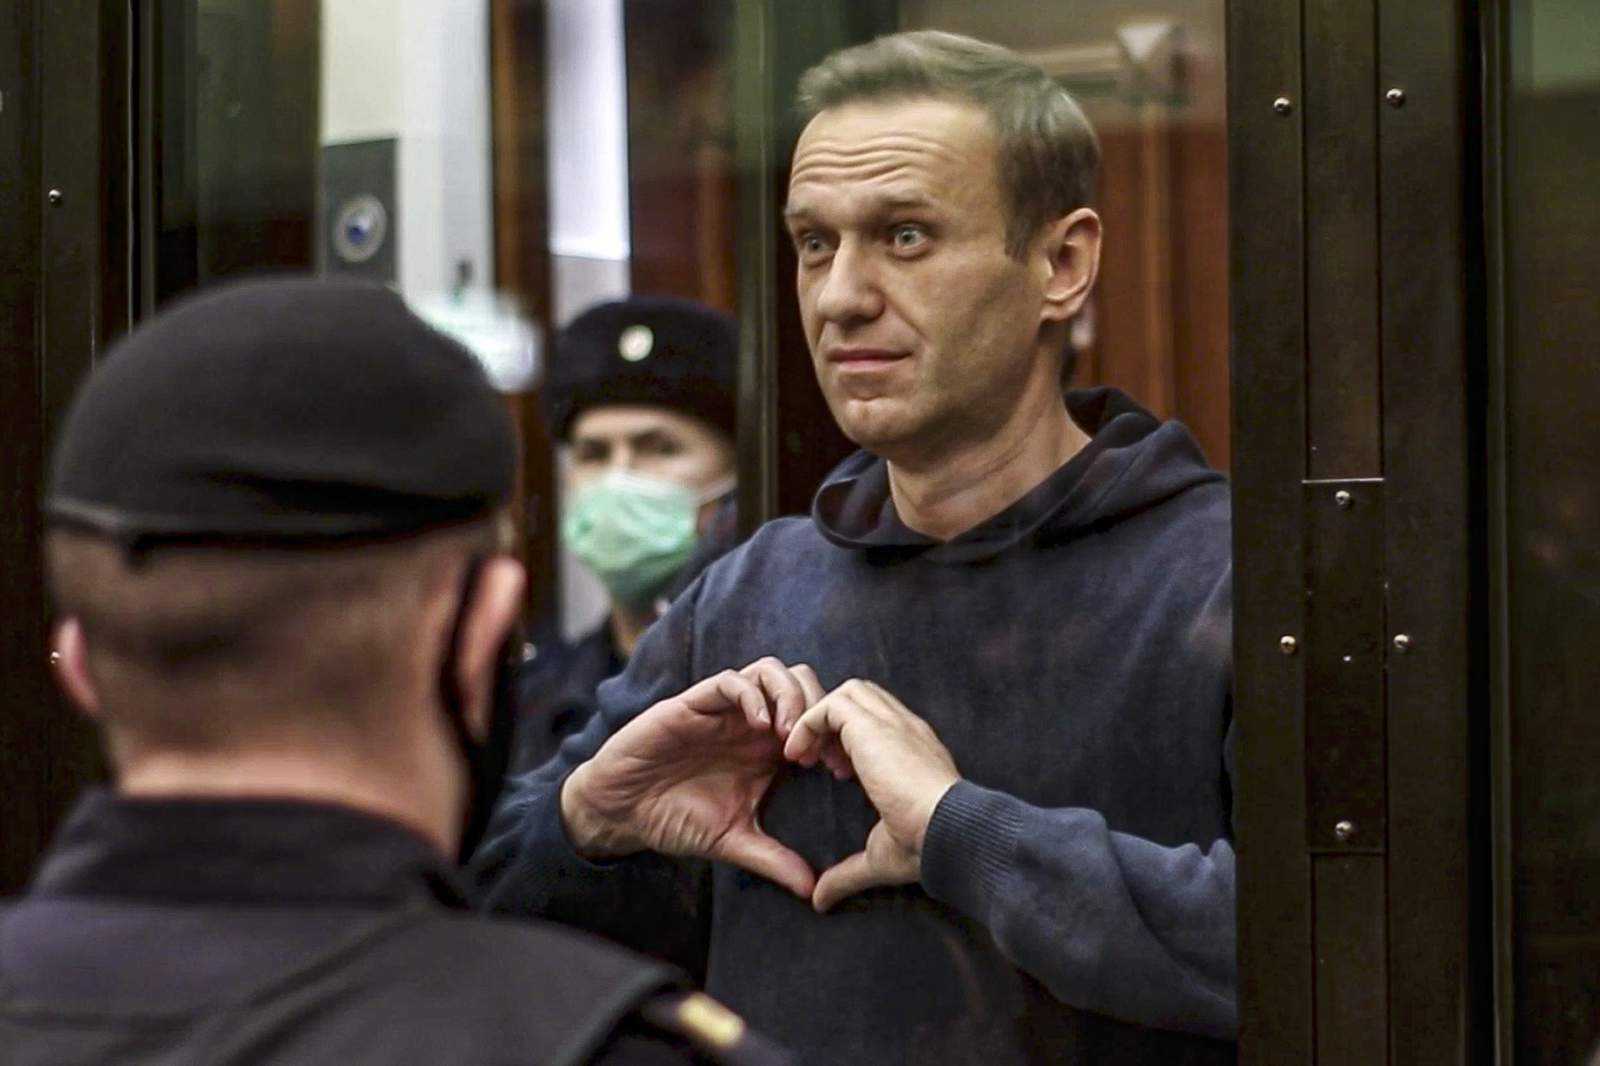 Russia rejects Western criticism over Navalny's prison term